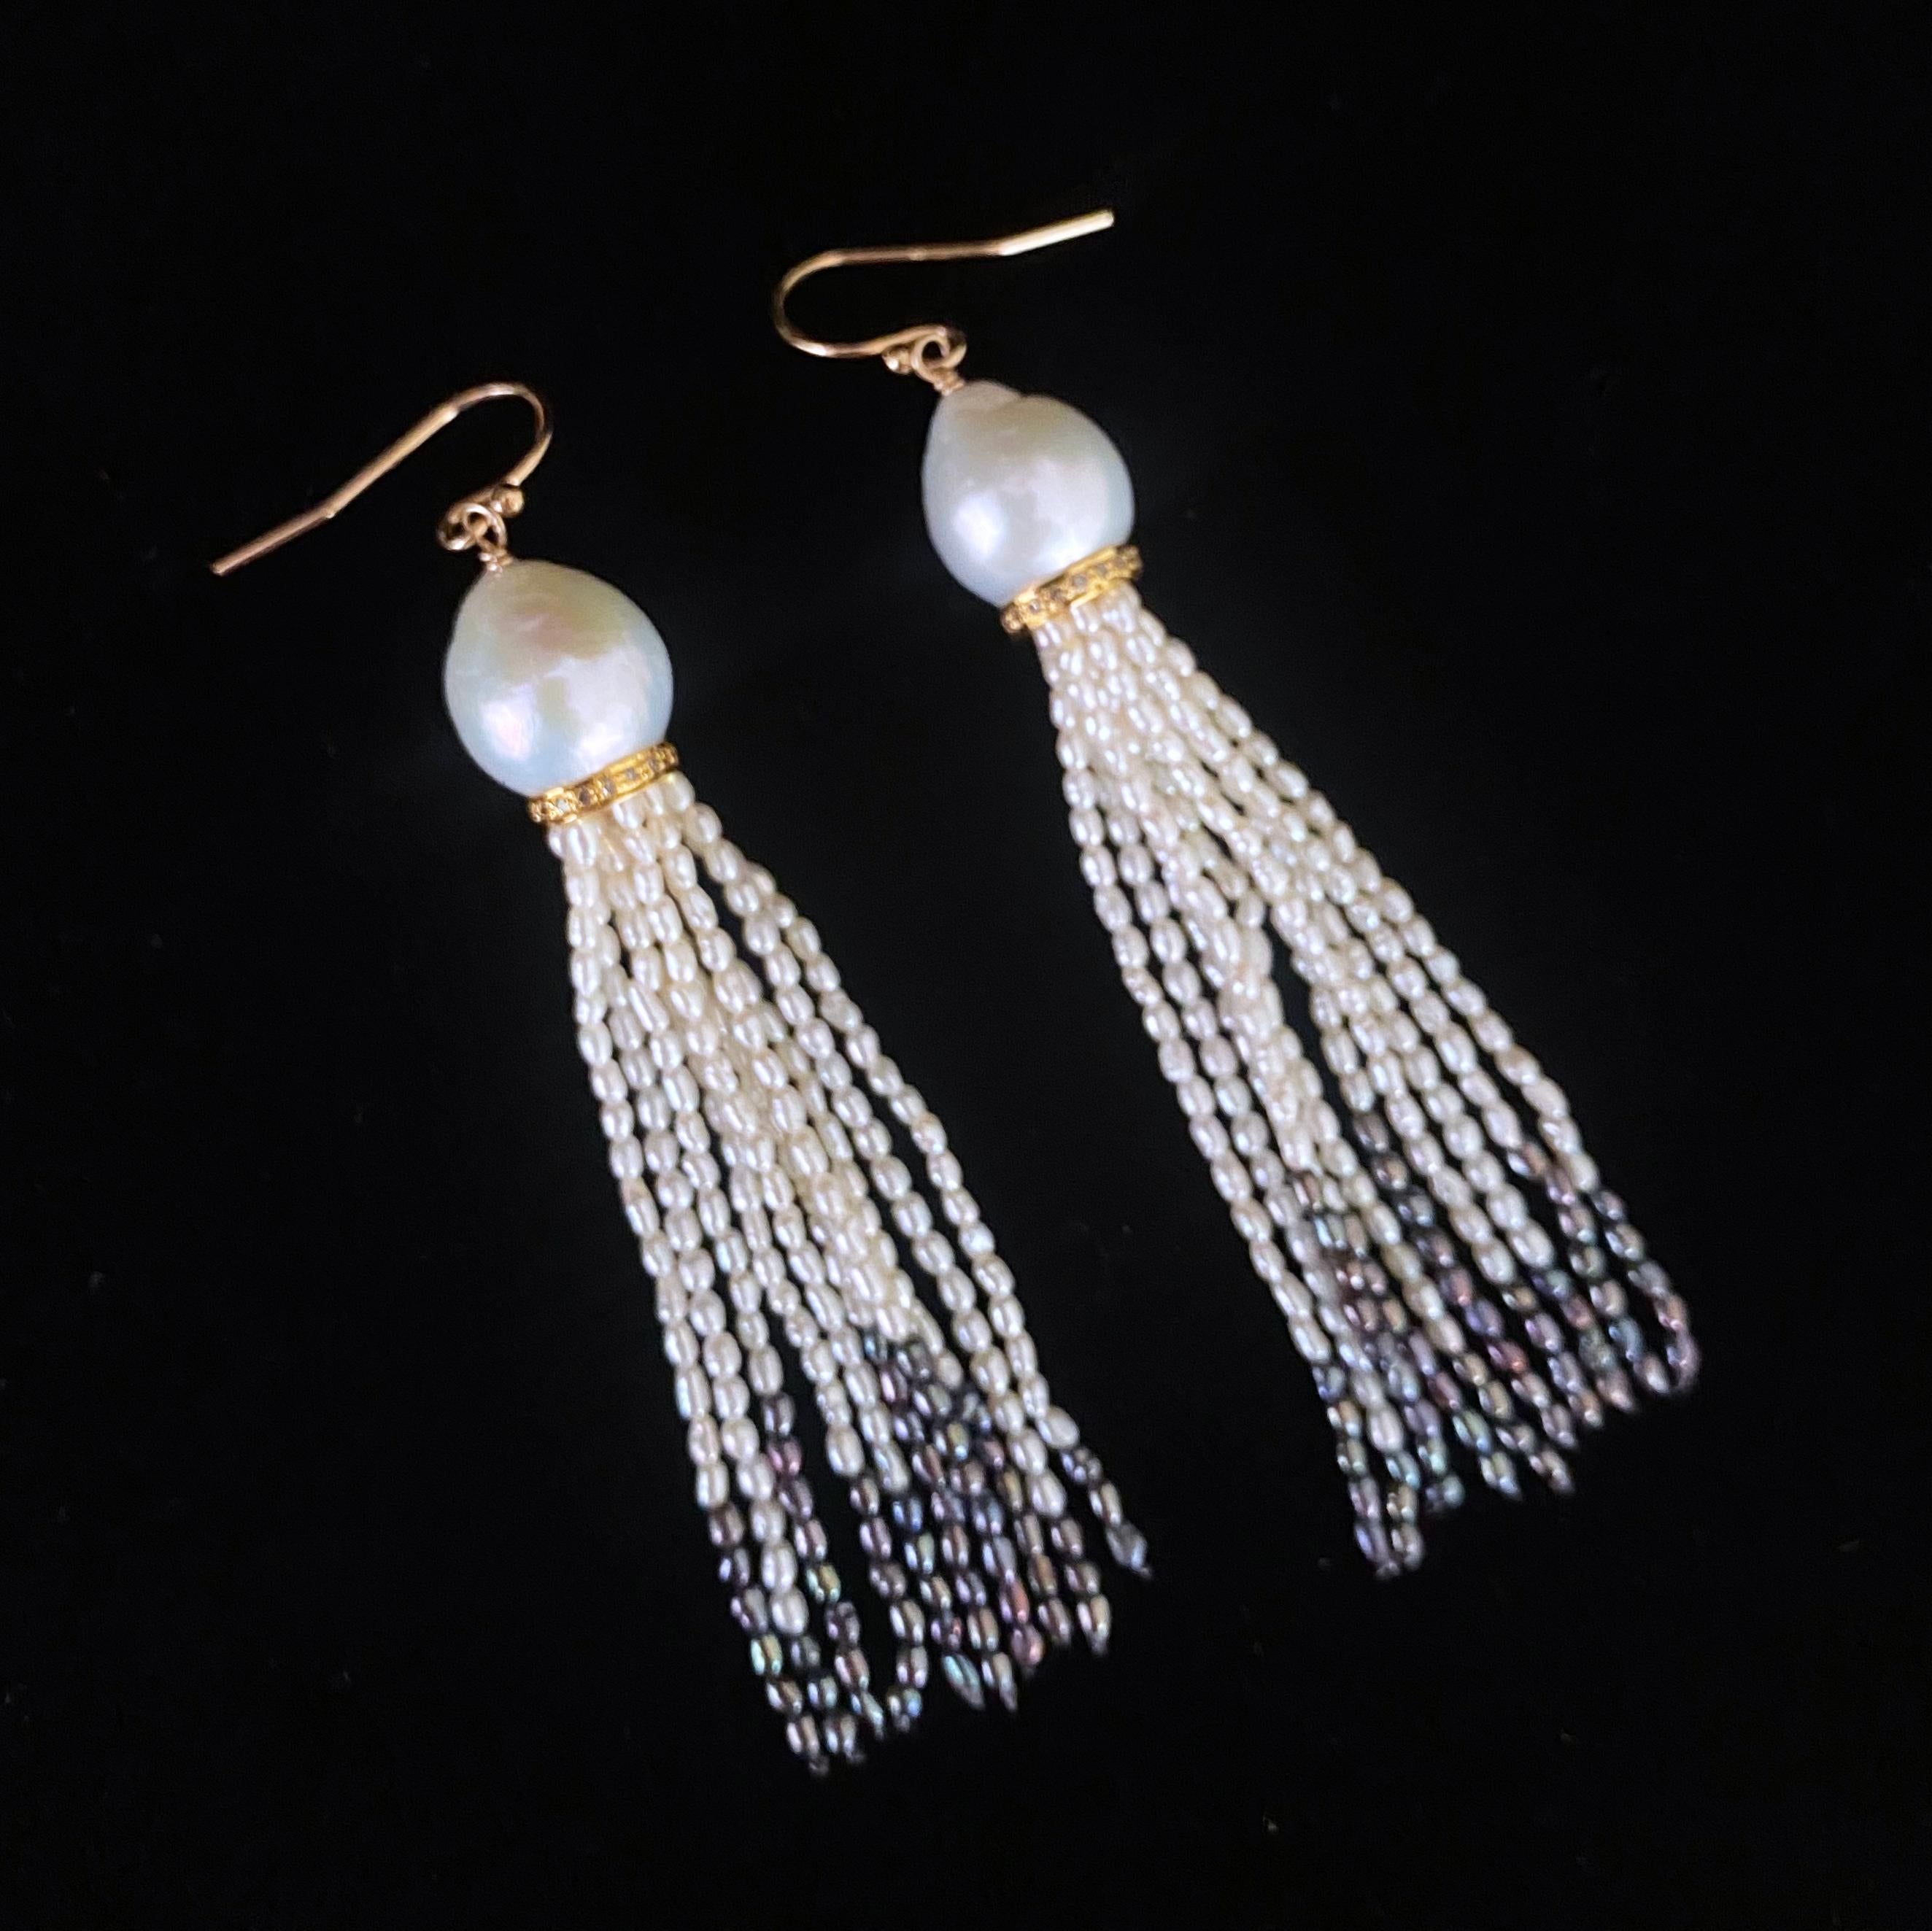 Beautiful pair of Earrings by Marina J.

This pair is made with all Pearls and solid 14k Yellow Gold. Two iridescent teardrop shaped Pearls sit atop a 14k Yellow Gold Plated - Diamond encrusted roundels, from which multiple strands of Seed Pearls